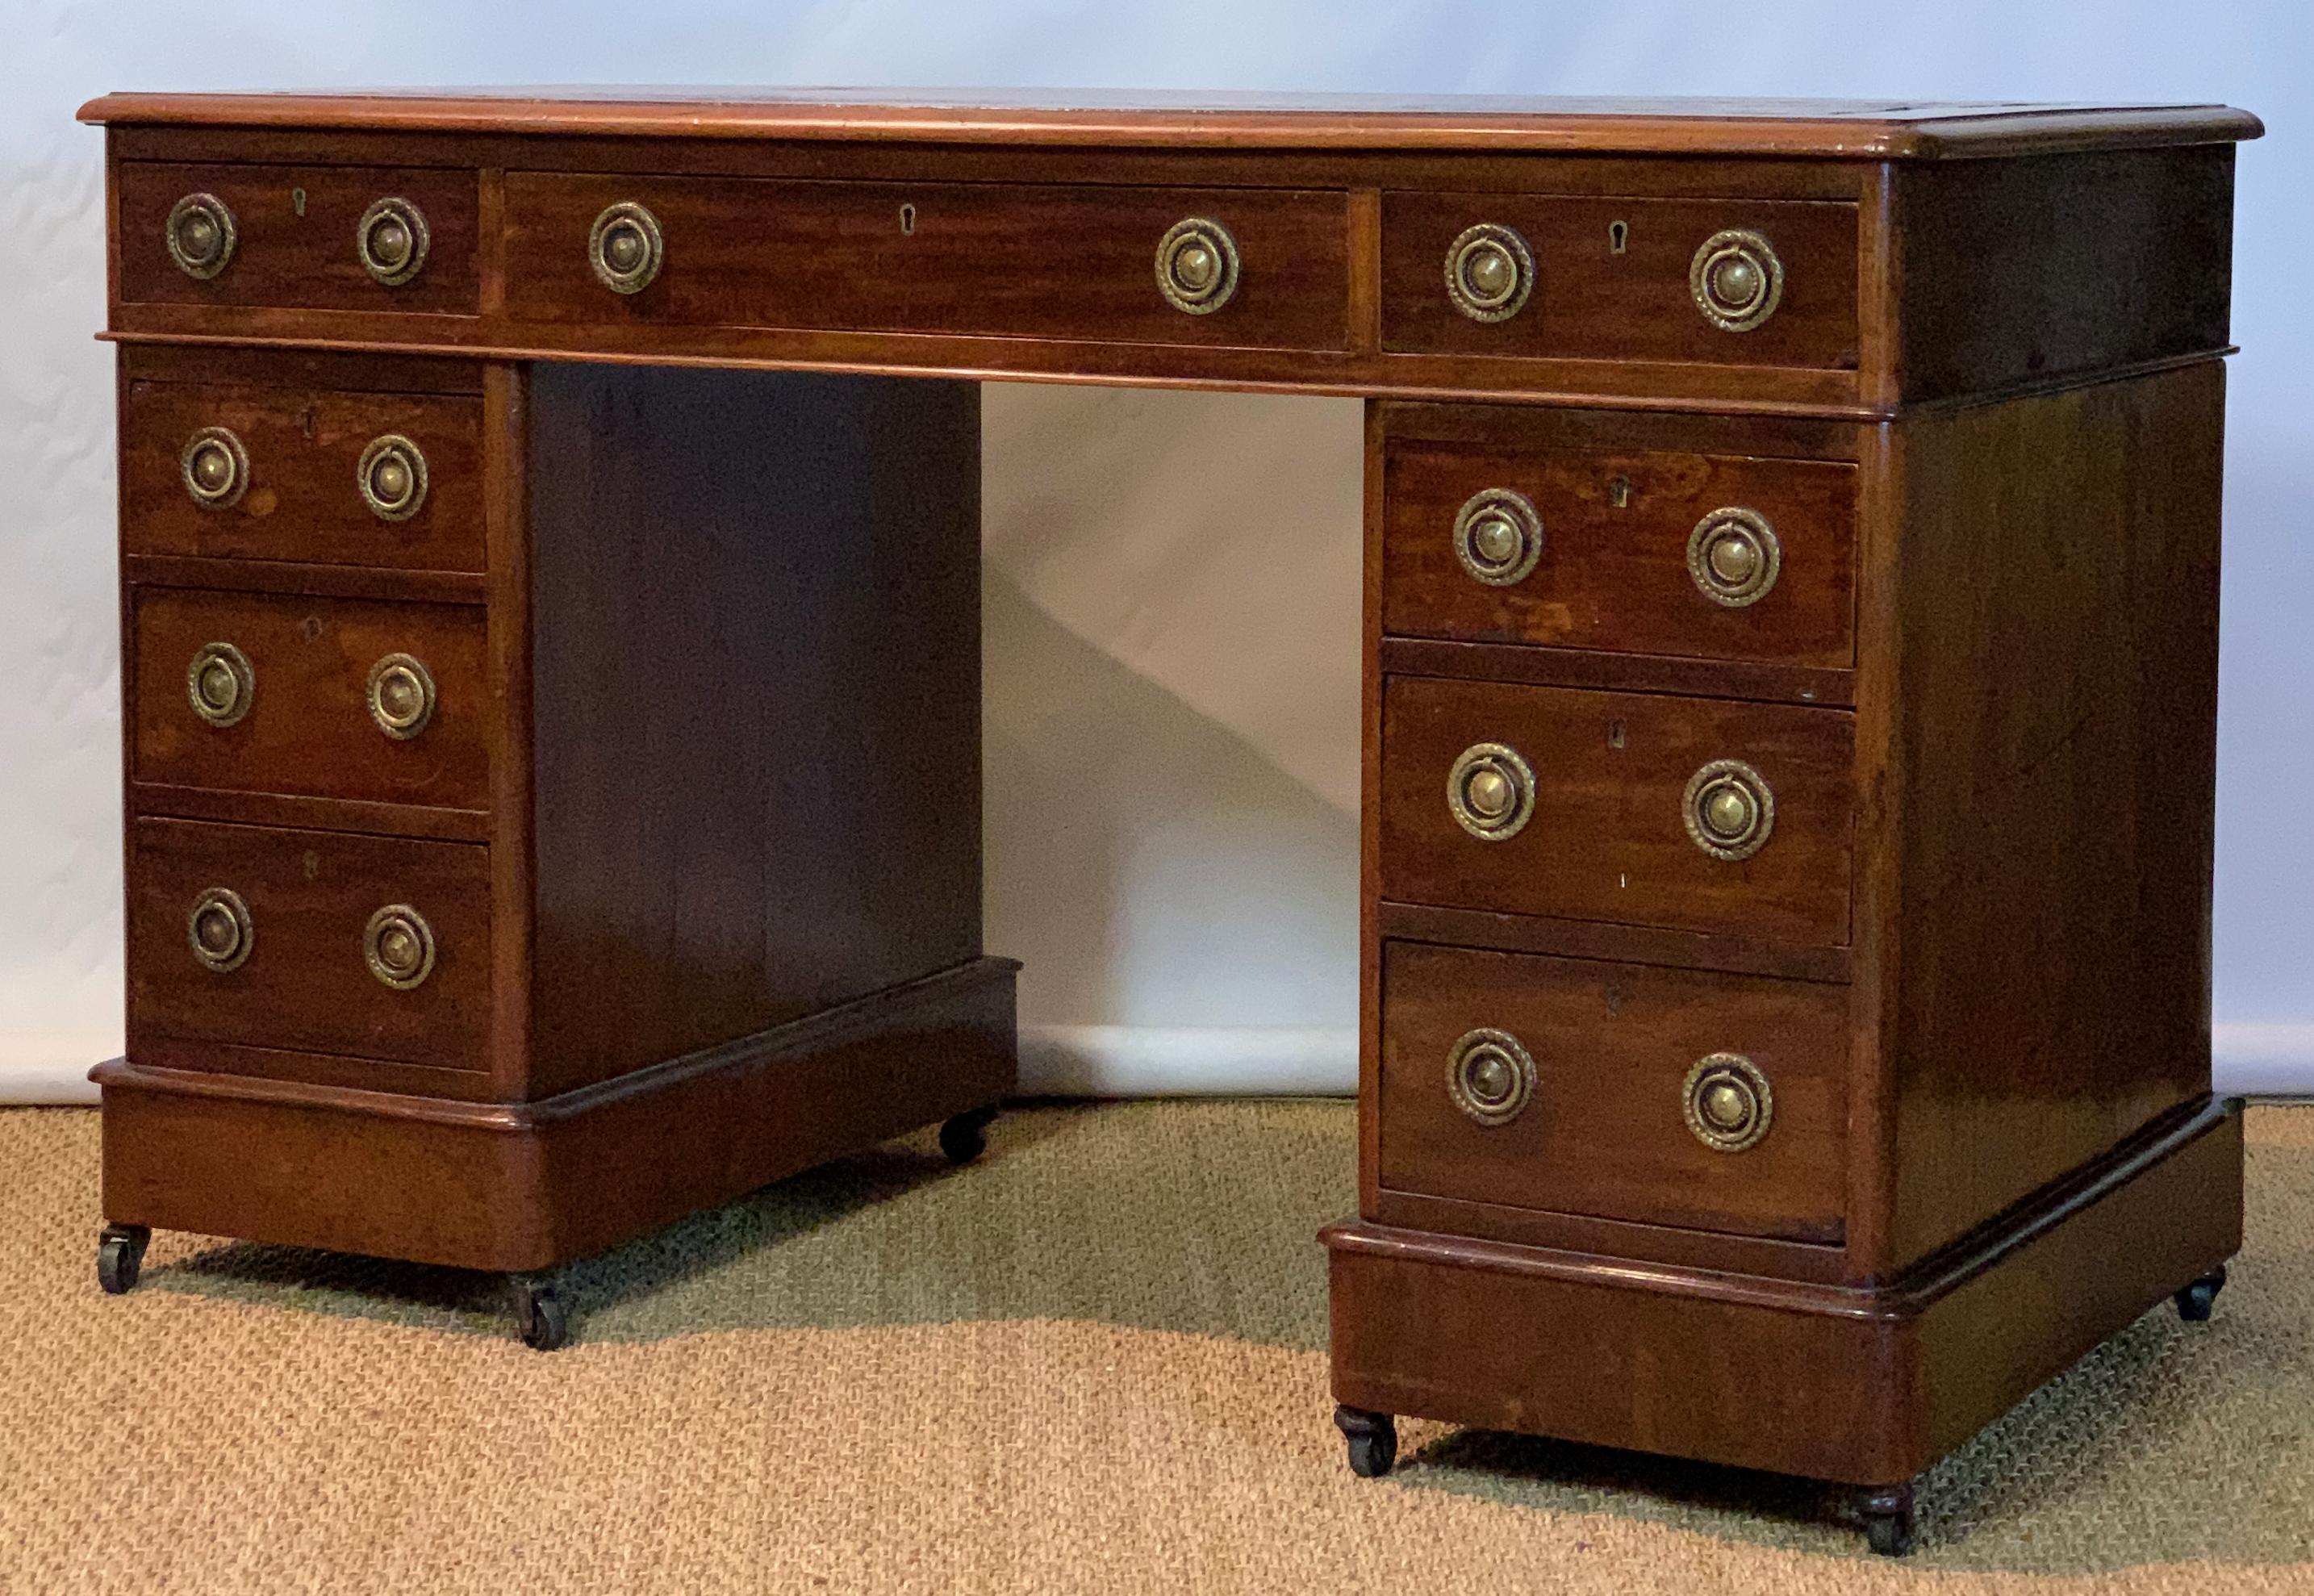 Hand-Crafted Small Mid-19th Century English Pedestal Desk